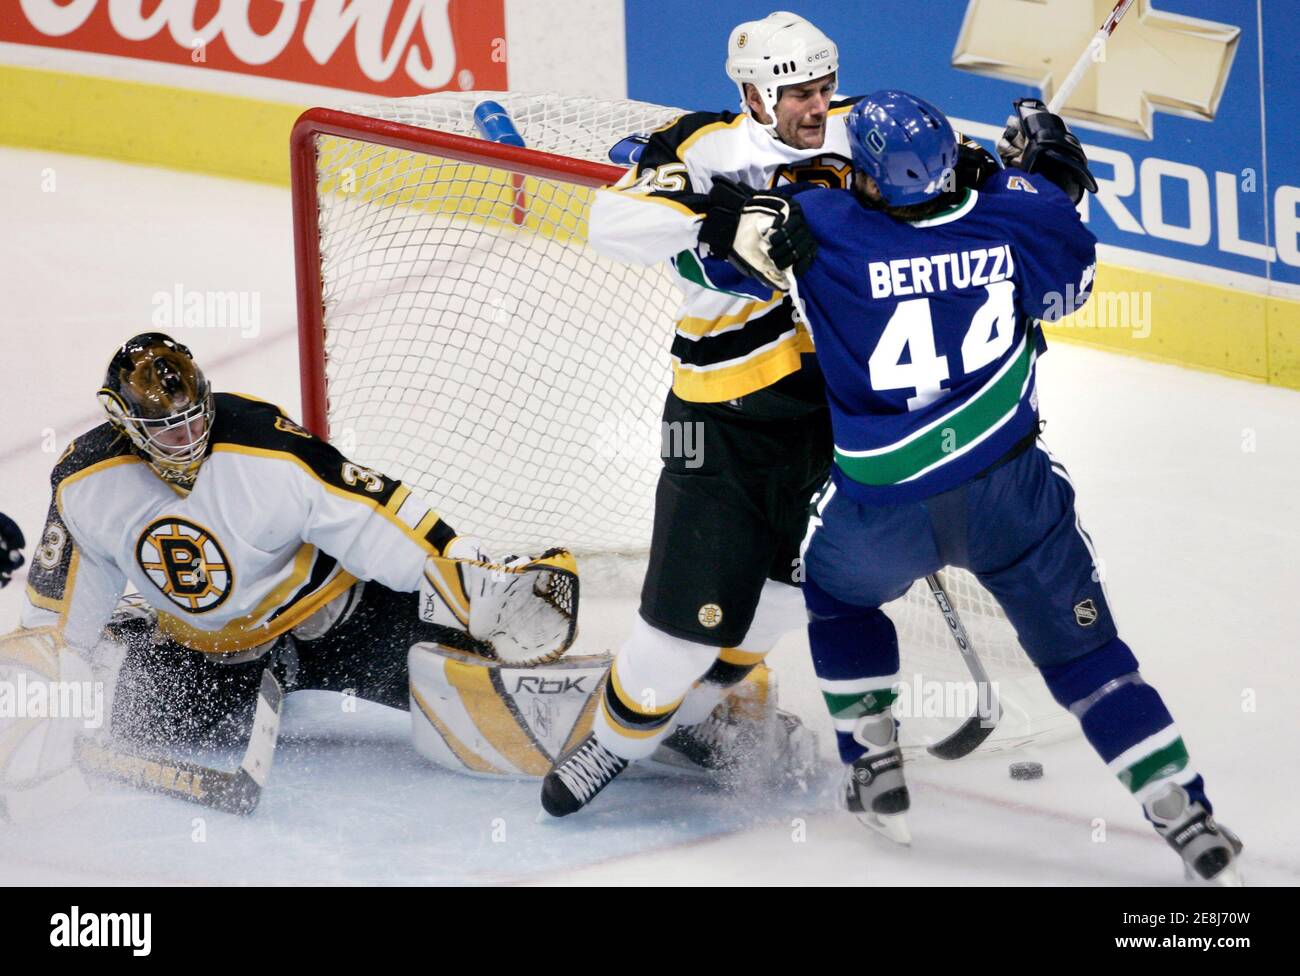 Boston Bruins Hal Gill (C) and Vancouver Canucks Todd Bertuzzi tangle with each other during NHL second period play in Vancouver, British Columbia, December 4, 2005. On the left is Bruins goalie Hannu Toivonsen. REUTERS/Andy Clark Stock Photo